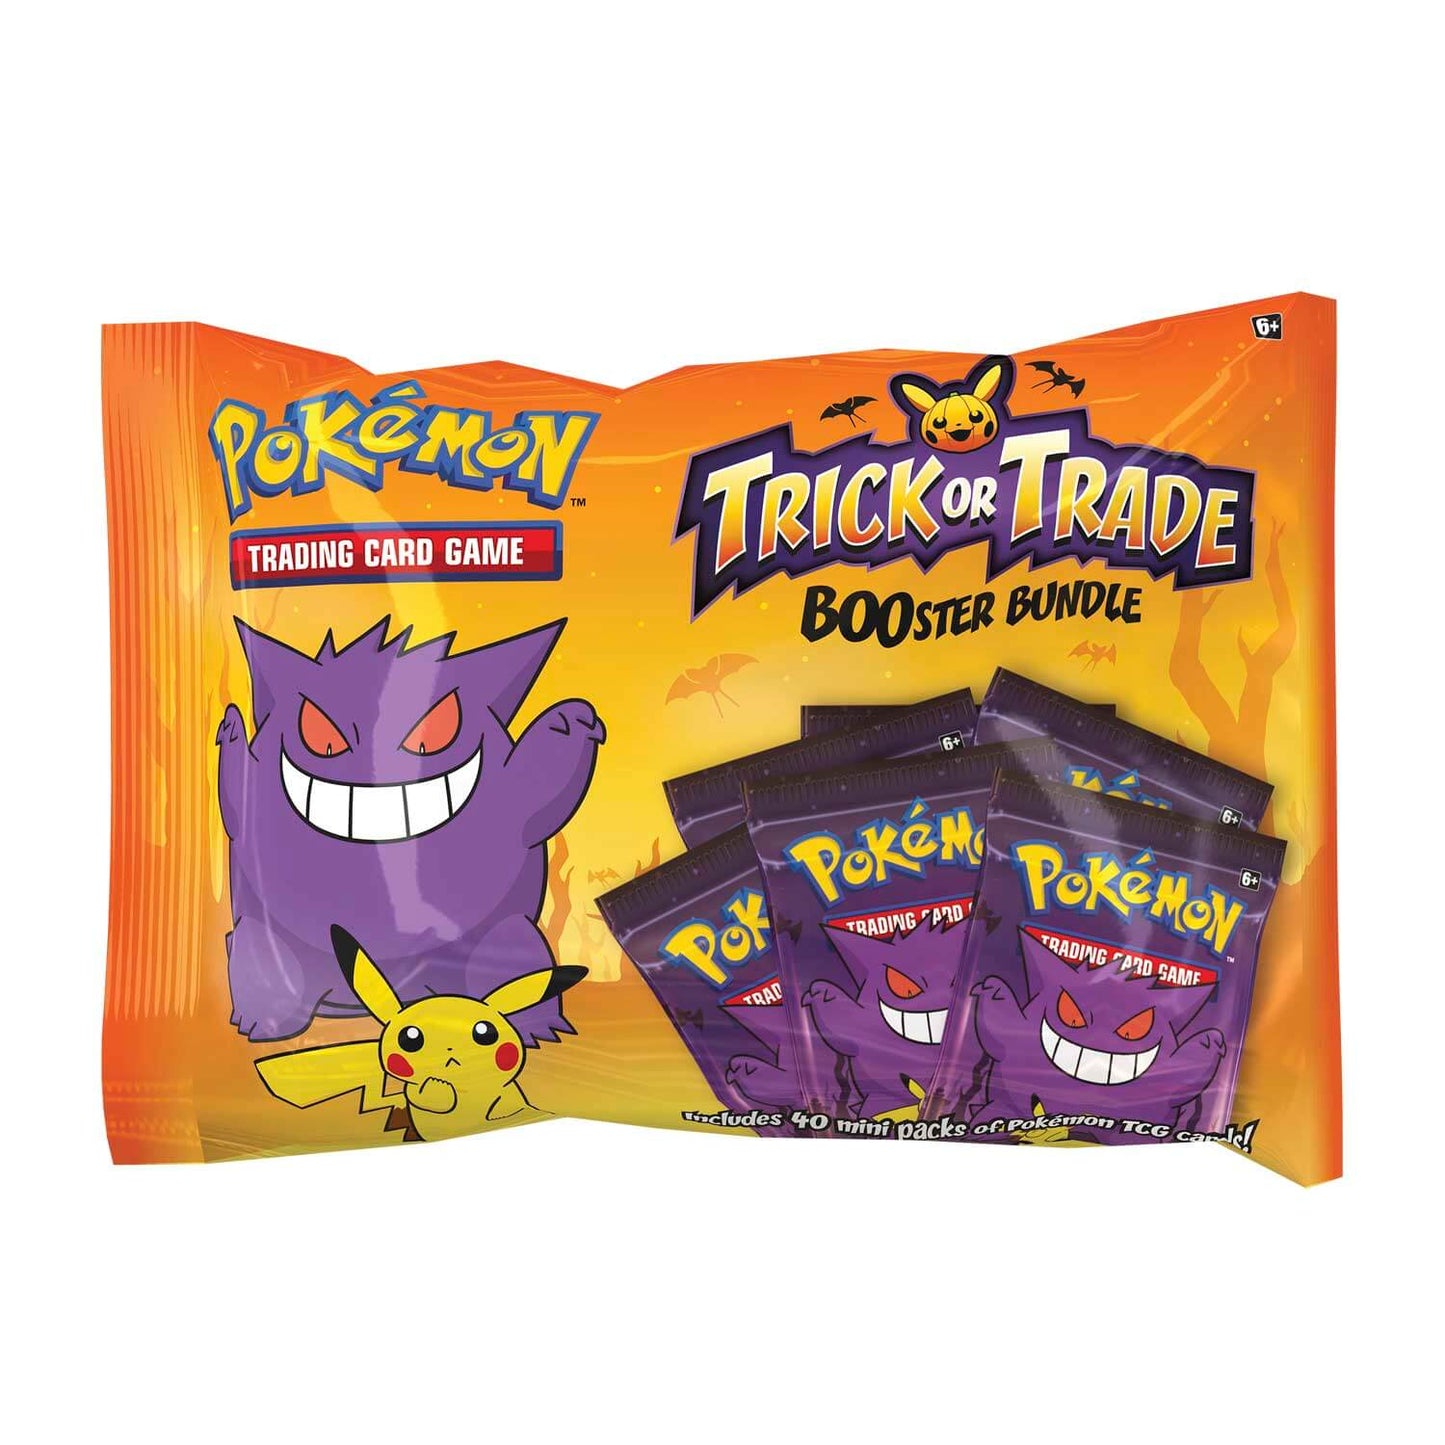 Pokemon TCG: Trick or Trade BOOster bundle packaging front artwork featuring gengar